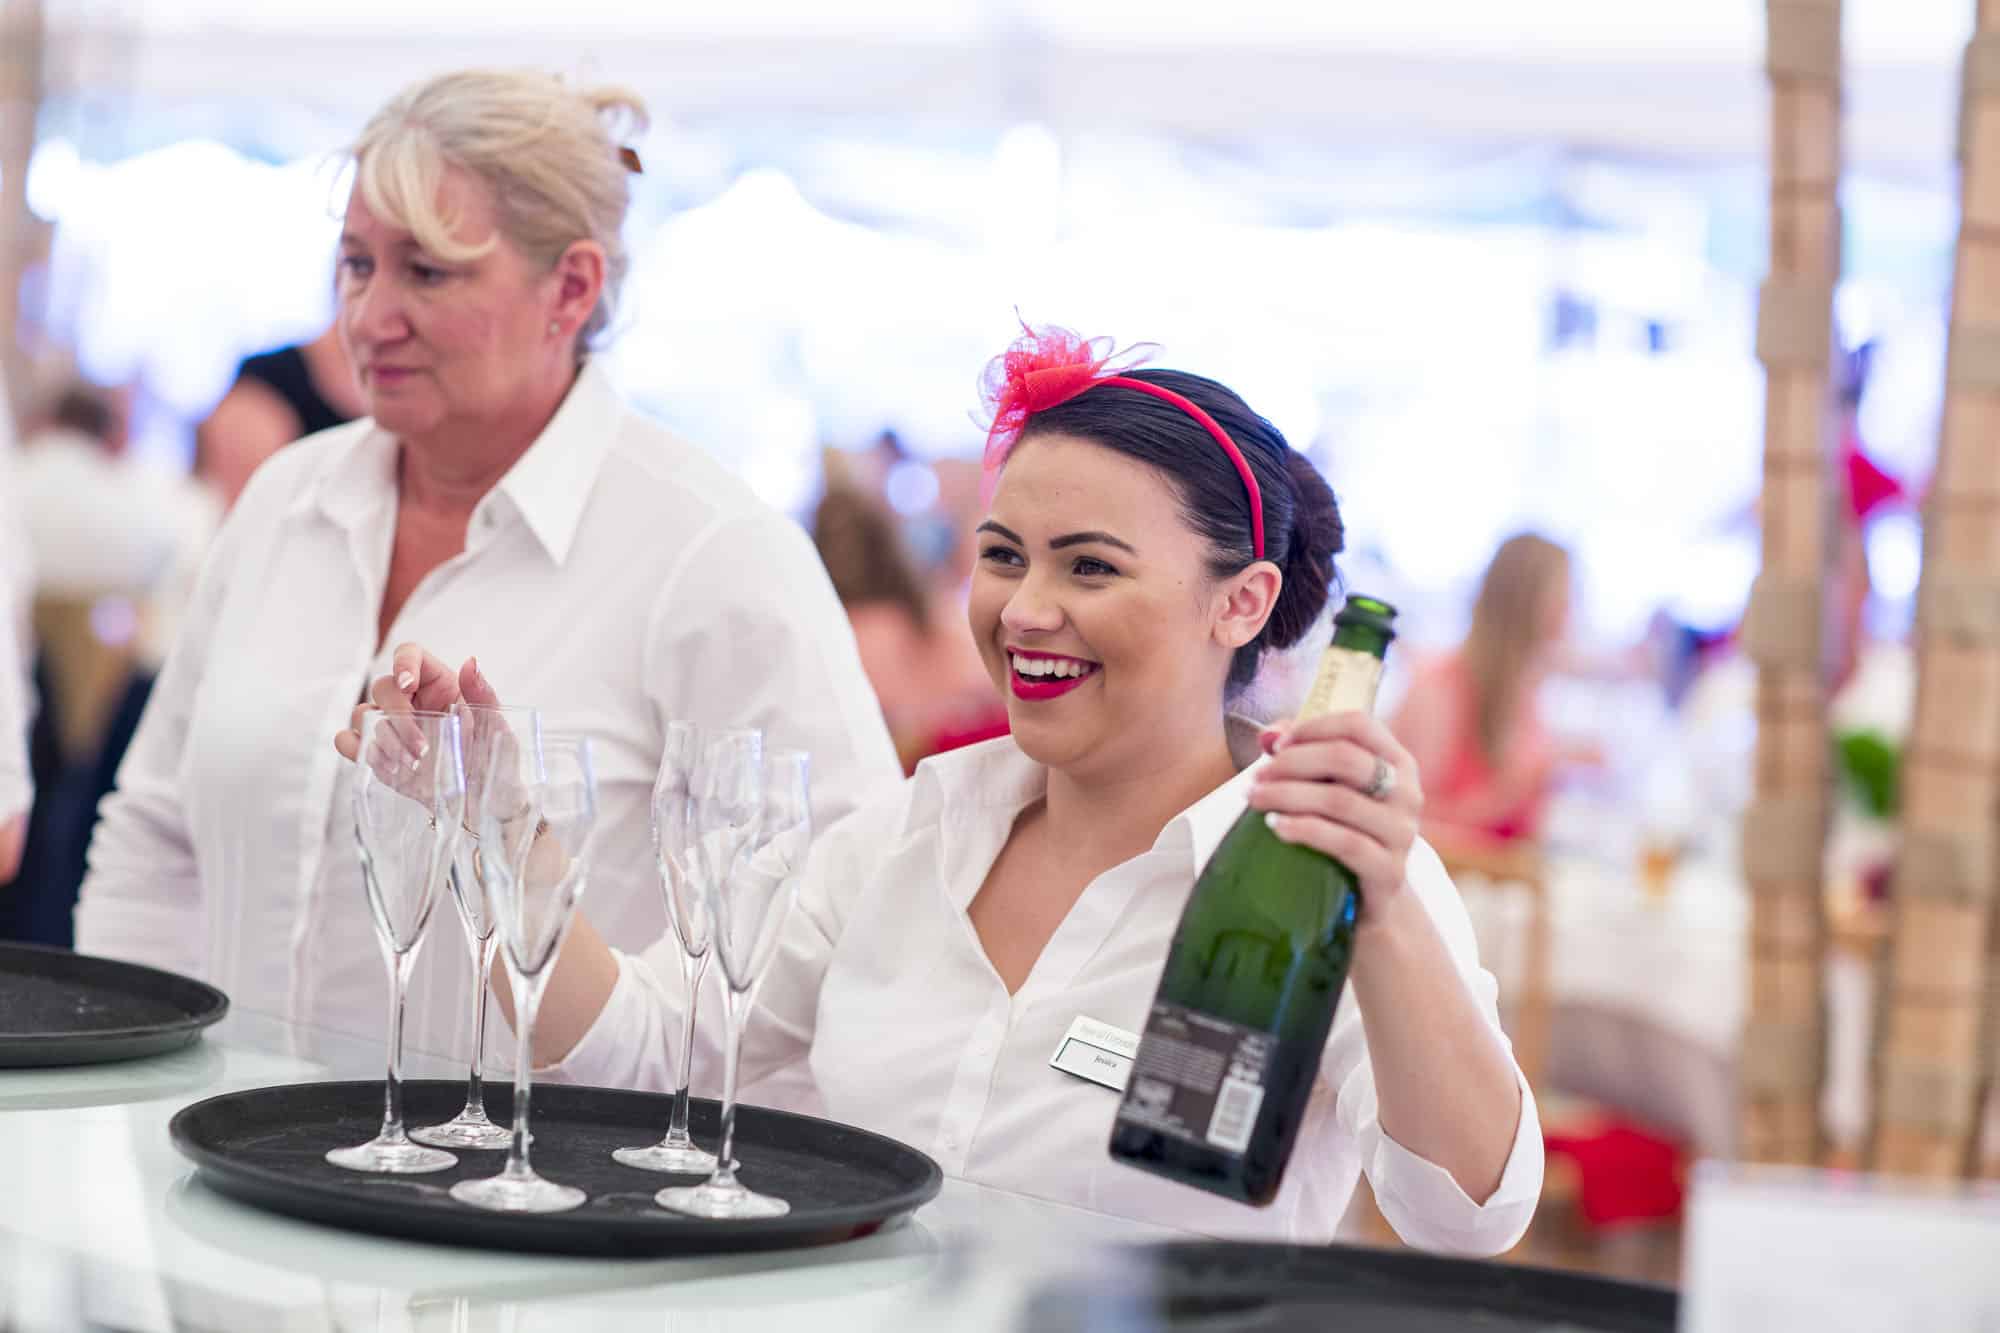 Image of waitresses smilling, holding a bottle of Champagne